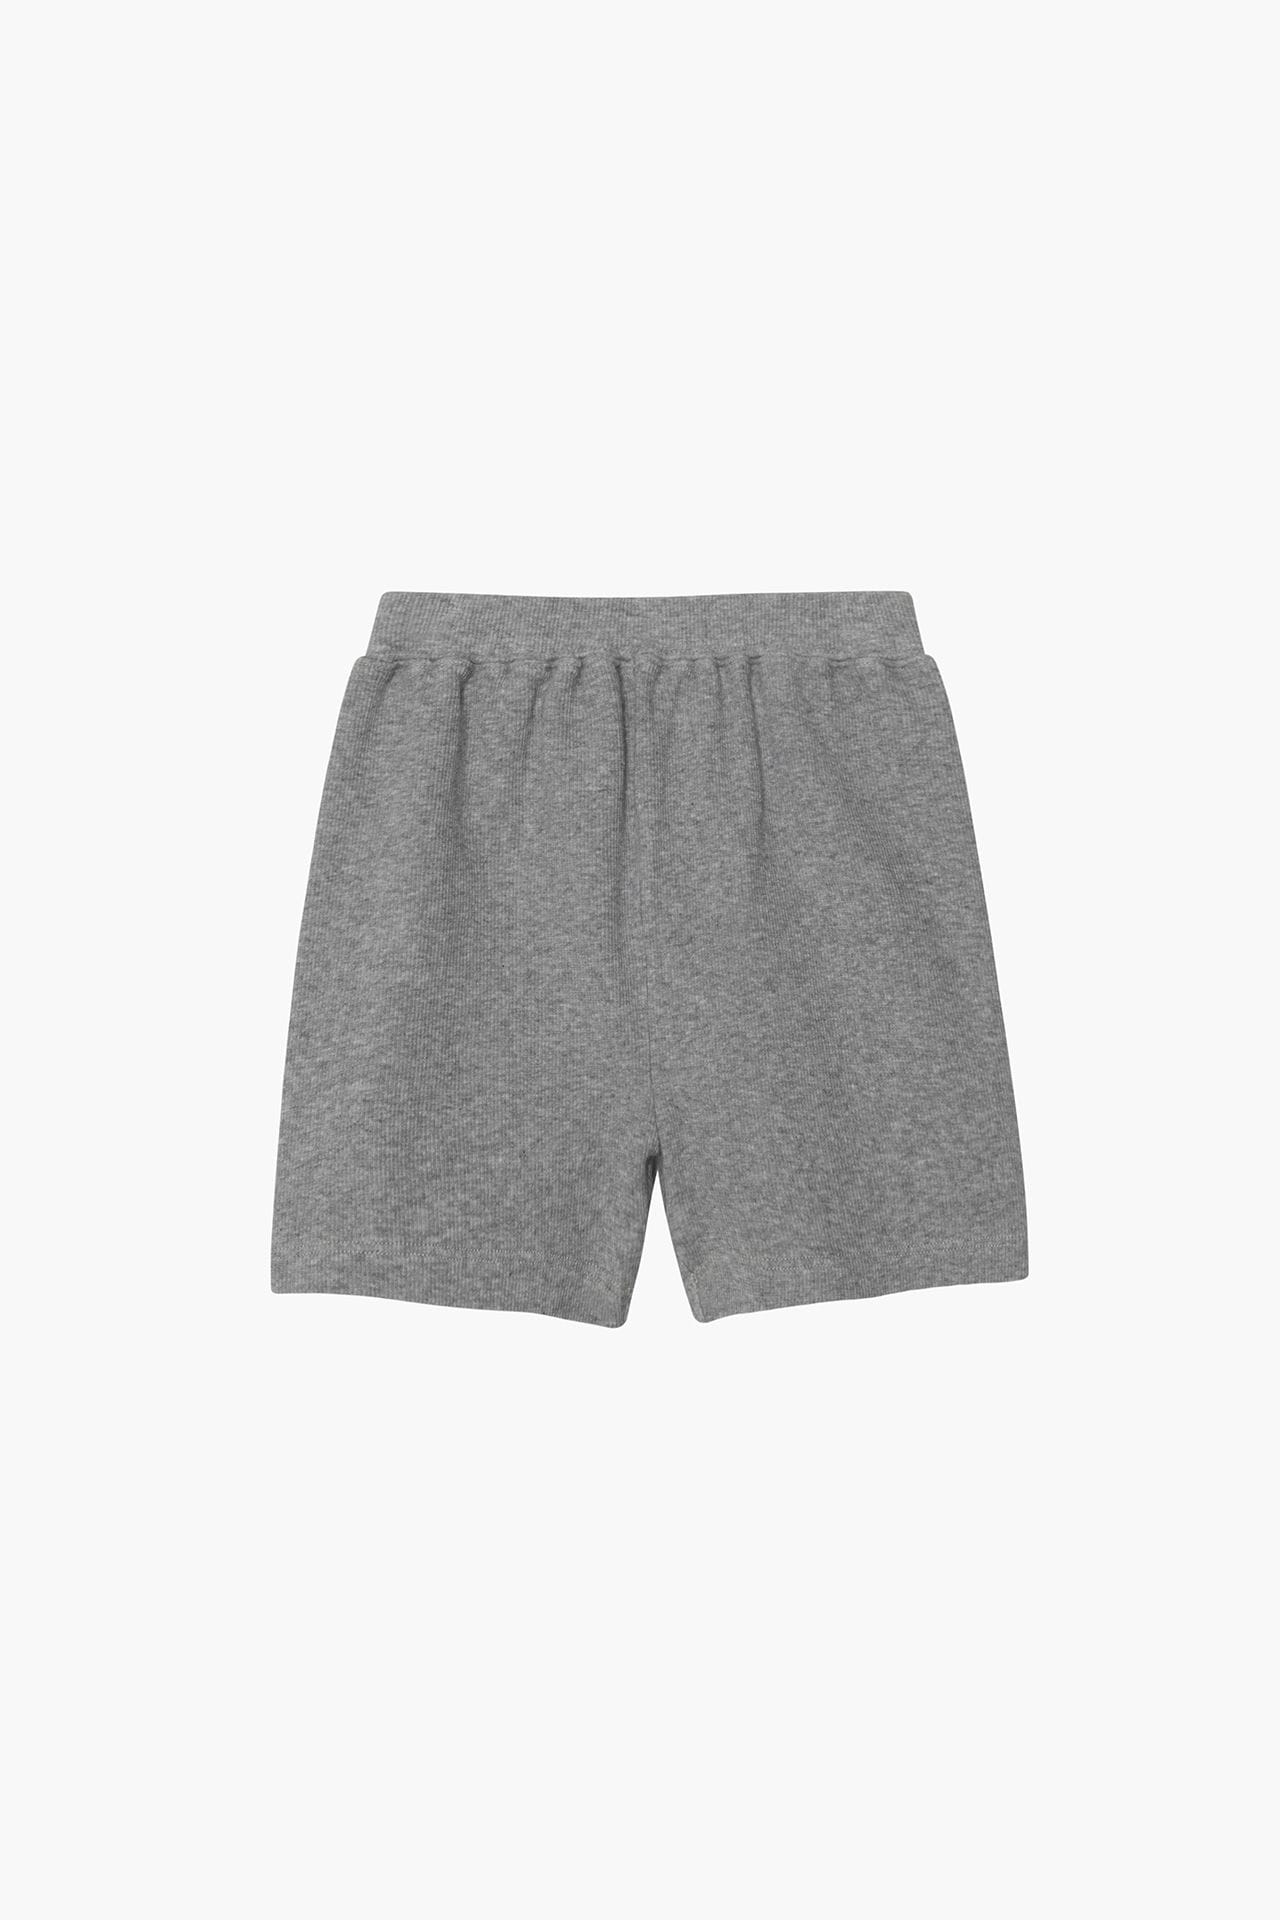 NEO FITTED MICRO SHORTS